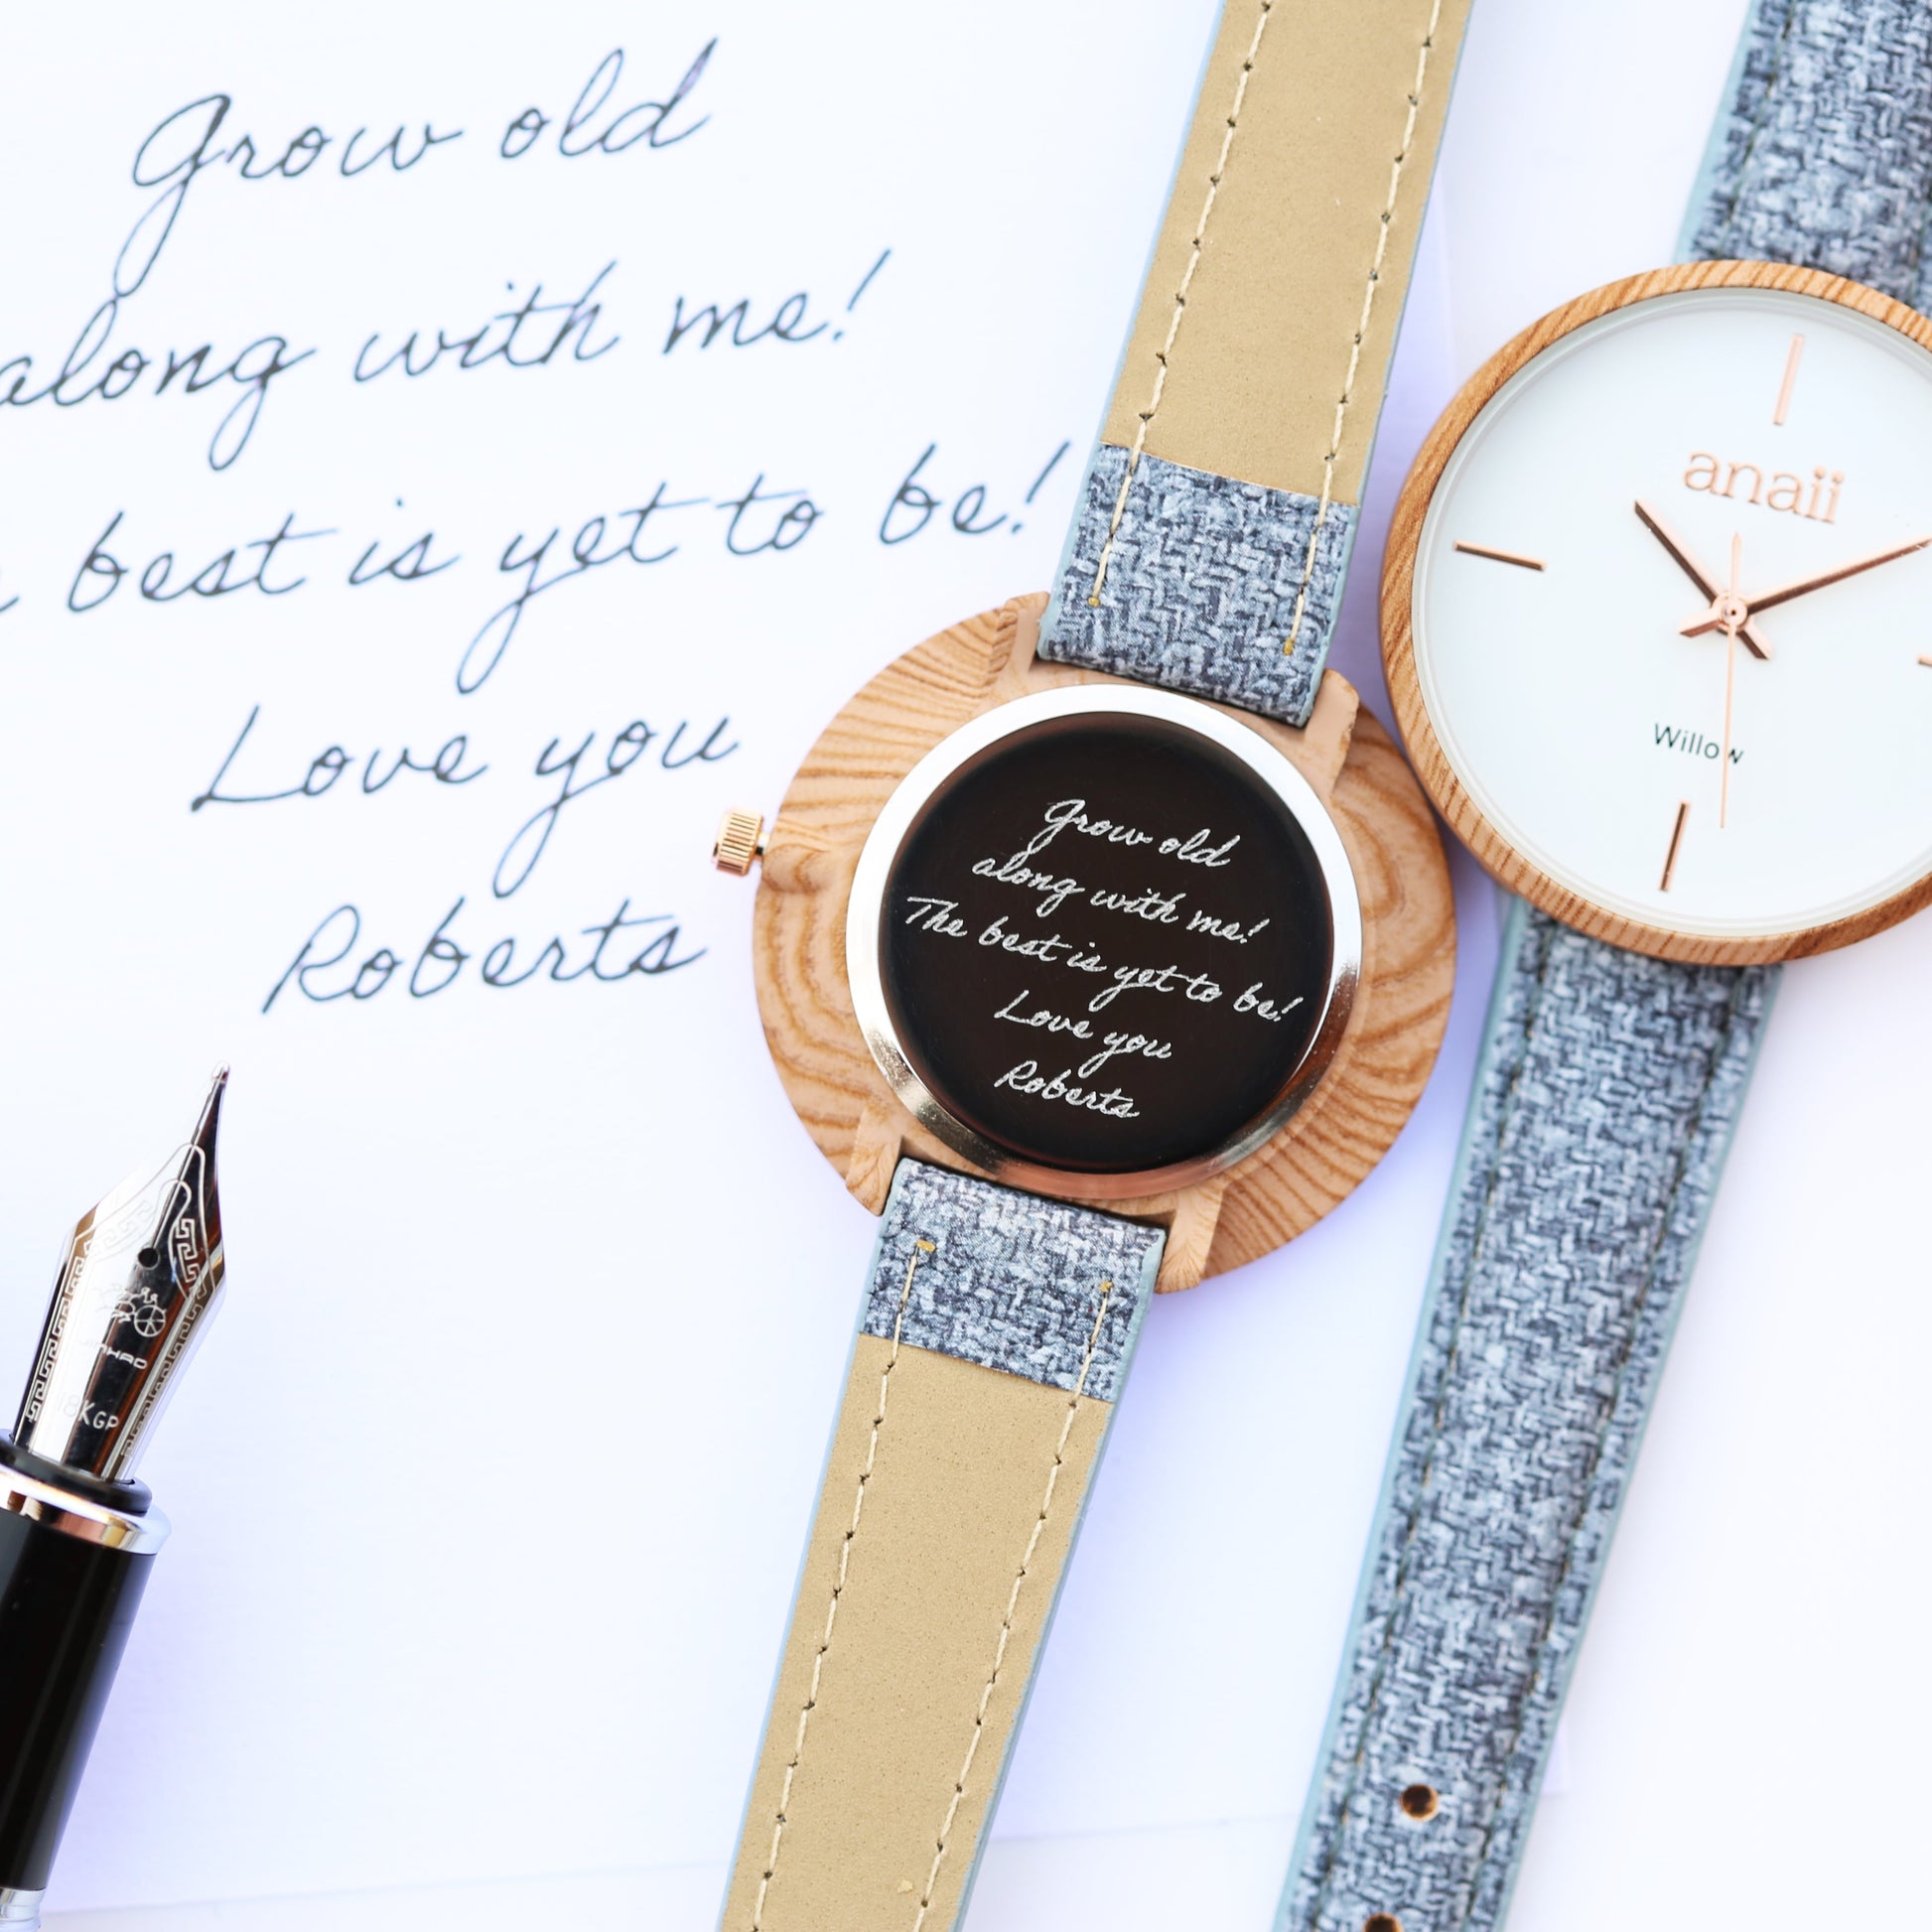 Personalized Ladies' Watches - Handwriting Engraved Watch in Lake Blue 